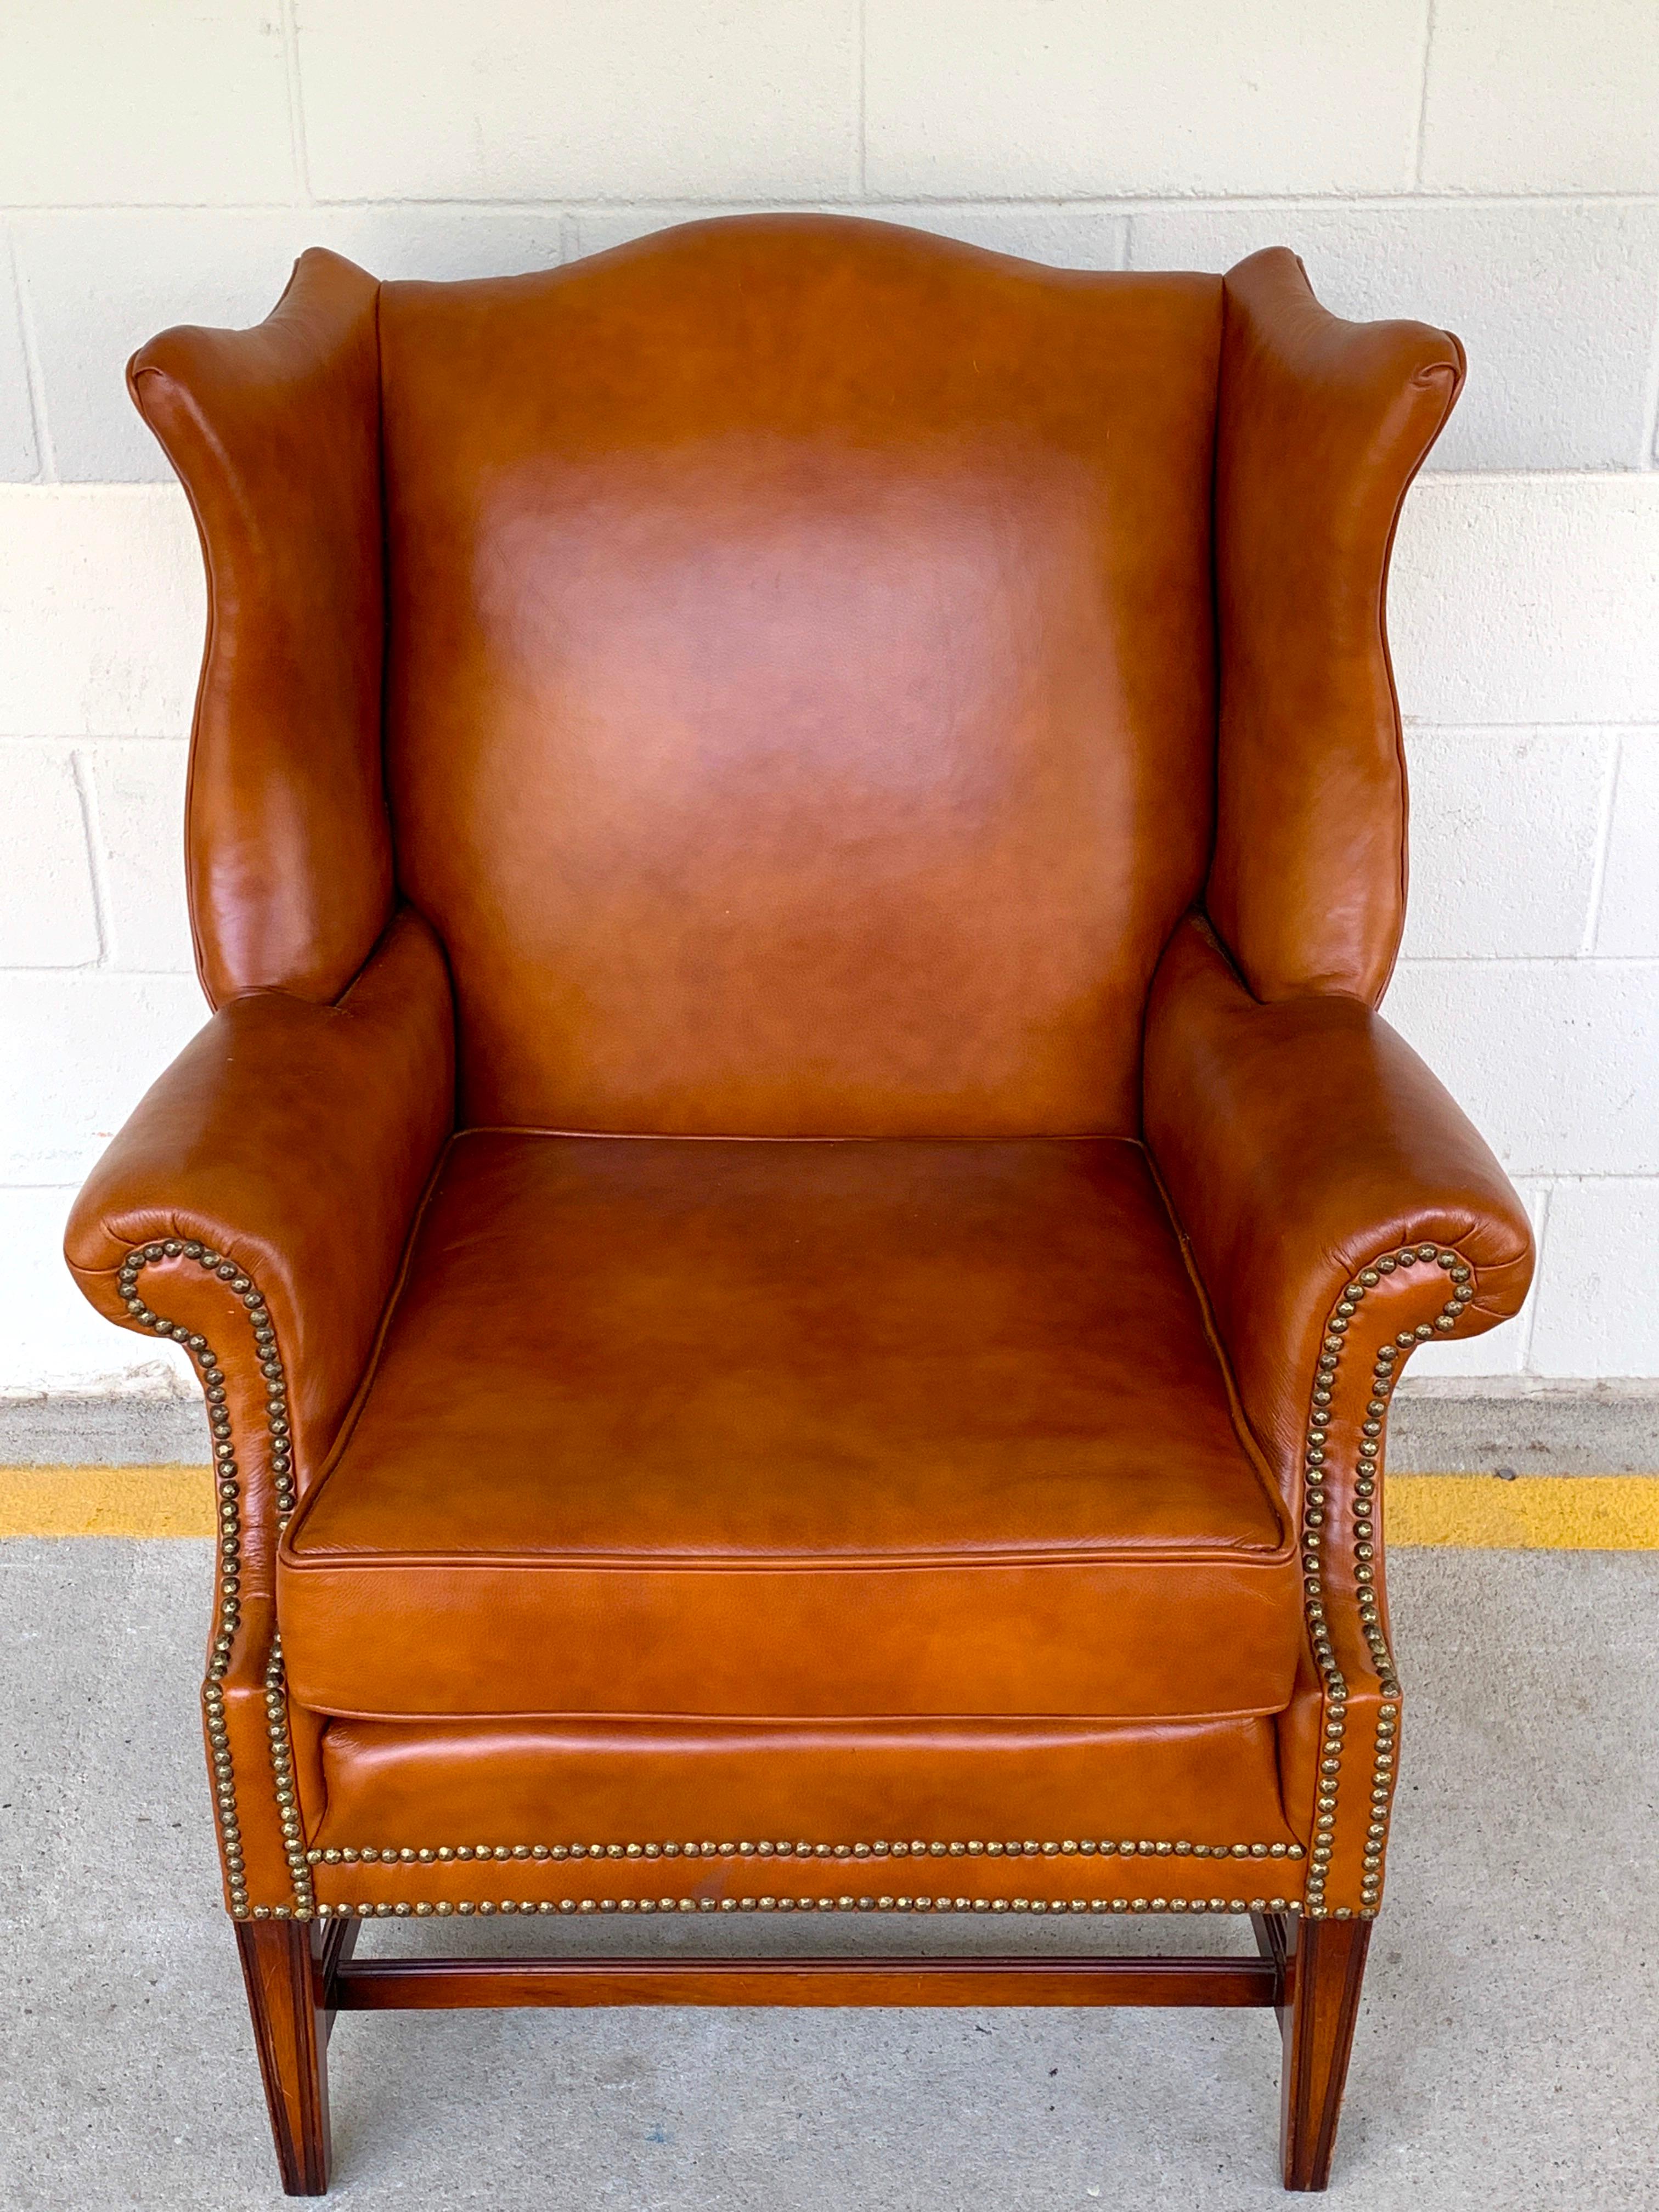 Regency English Saddle Leather Mahogany Wingback Chair For Sale